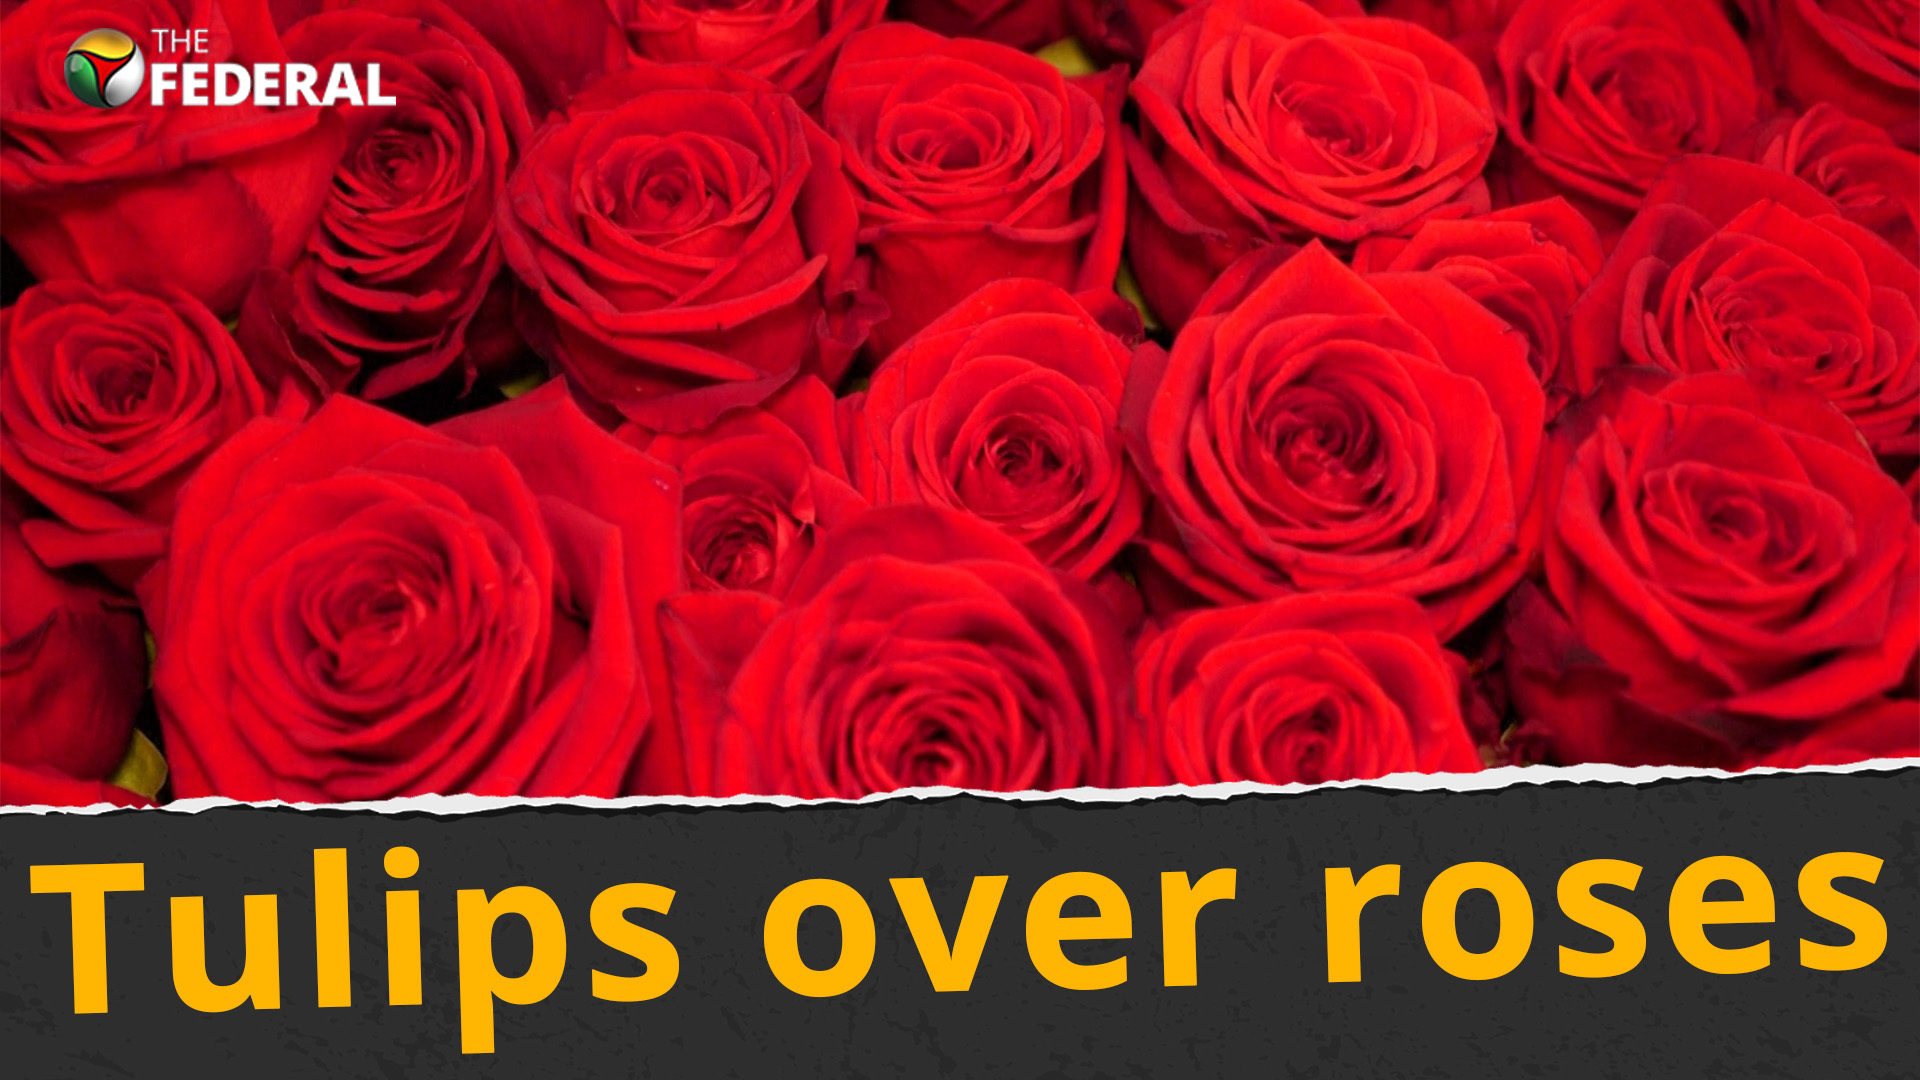 Red roses for Valentines Day? Florists call it ecological nonsense